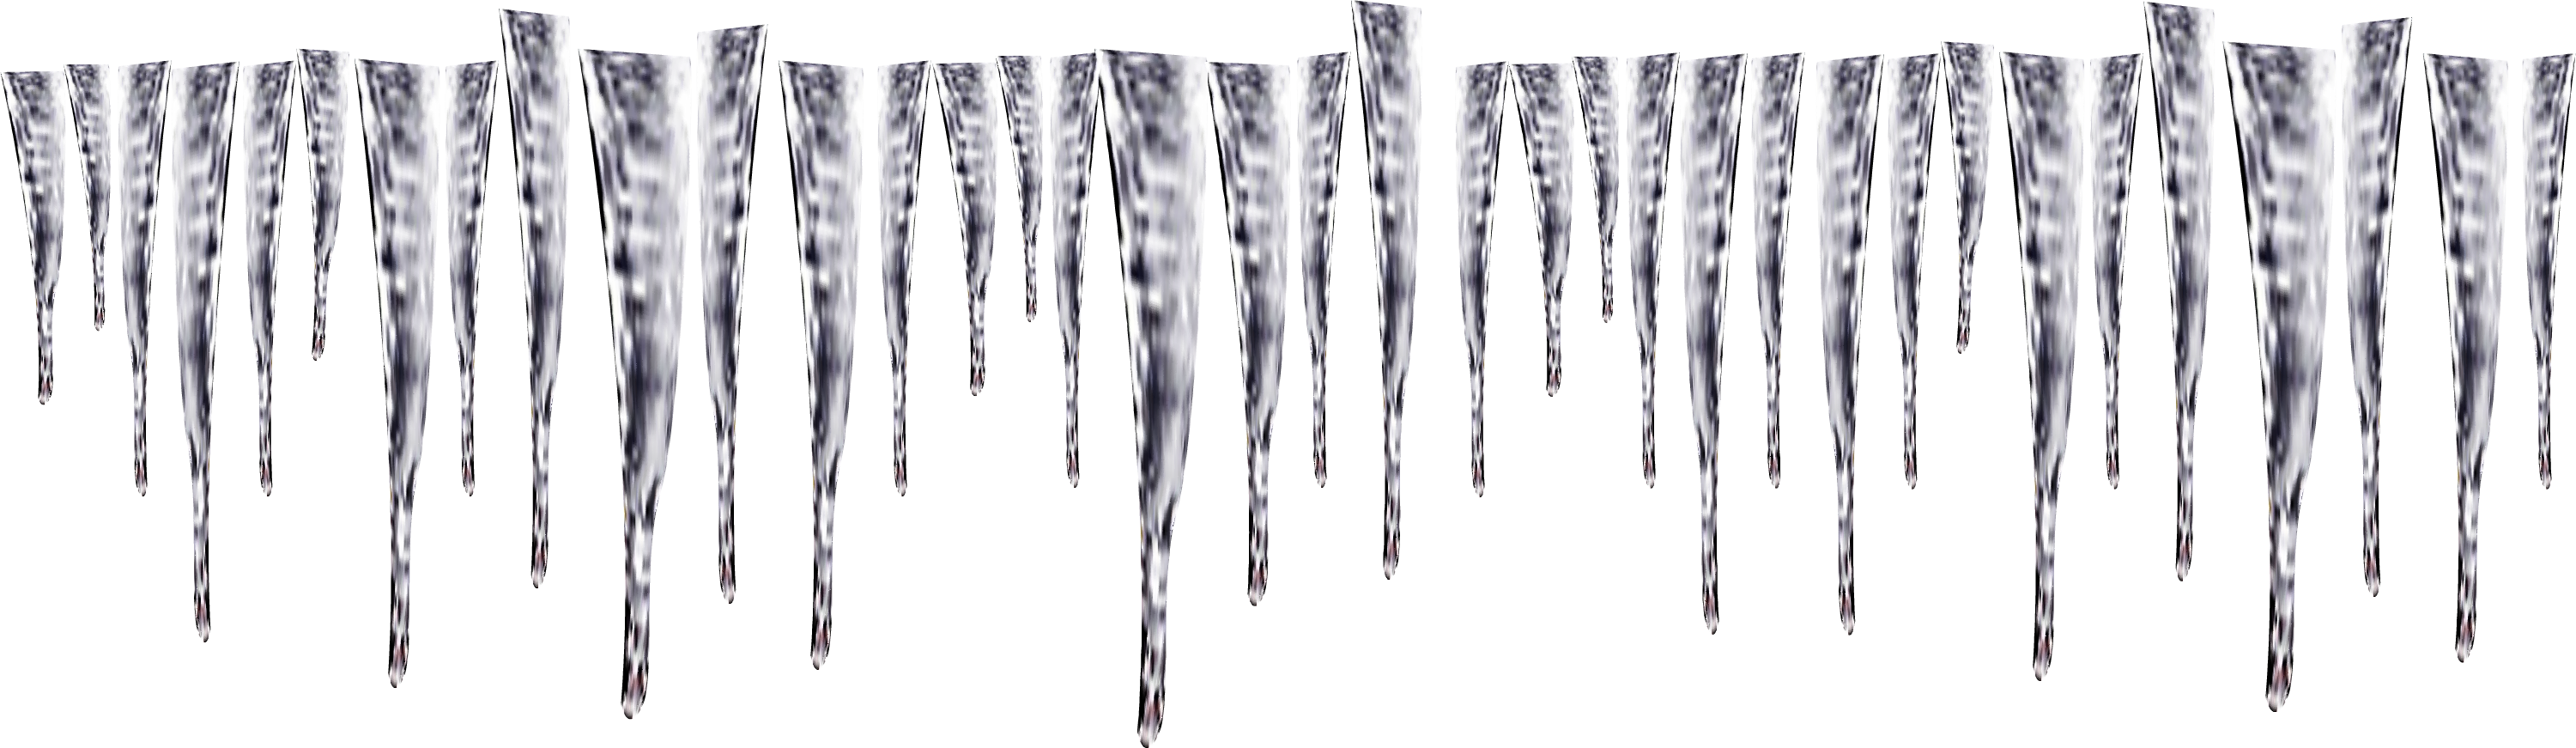 Icicles PNG Background Image